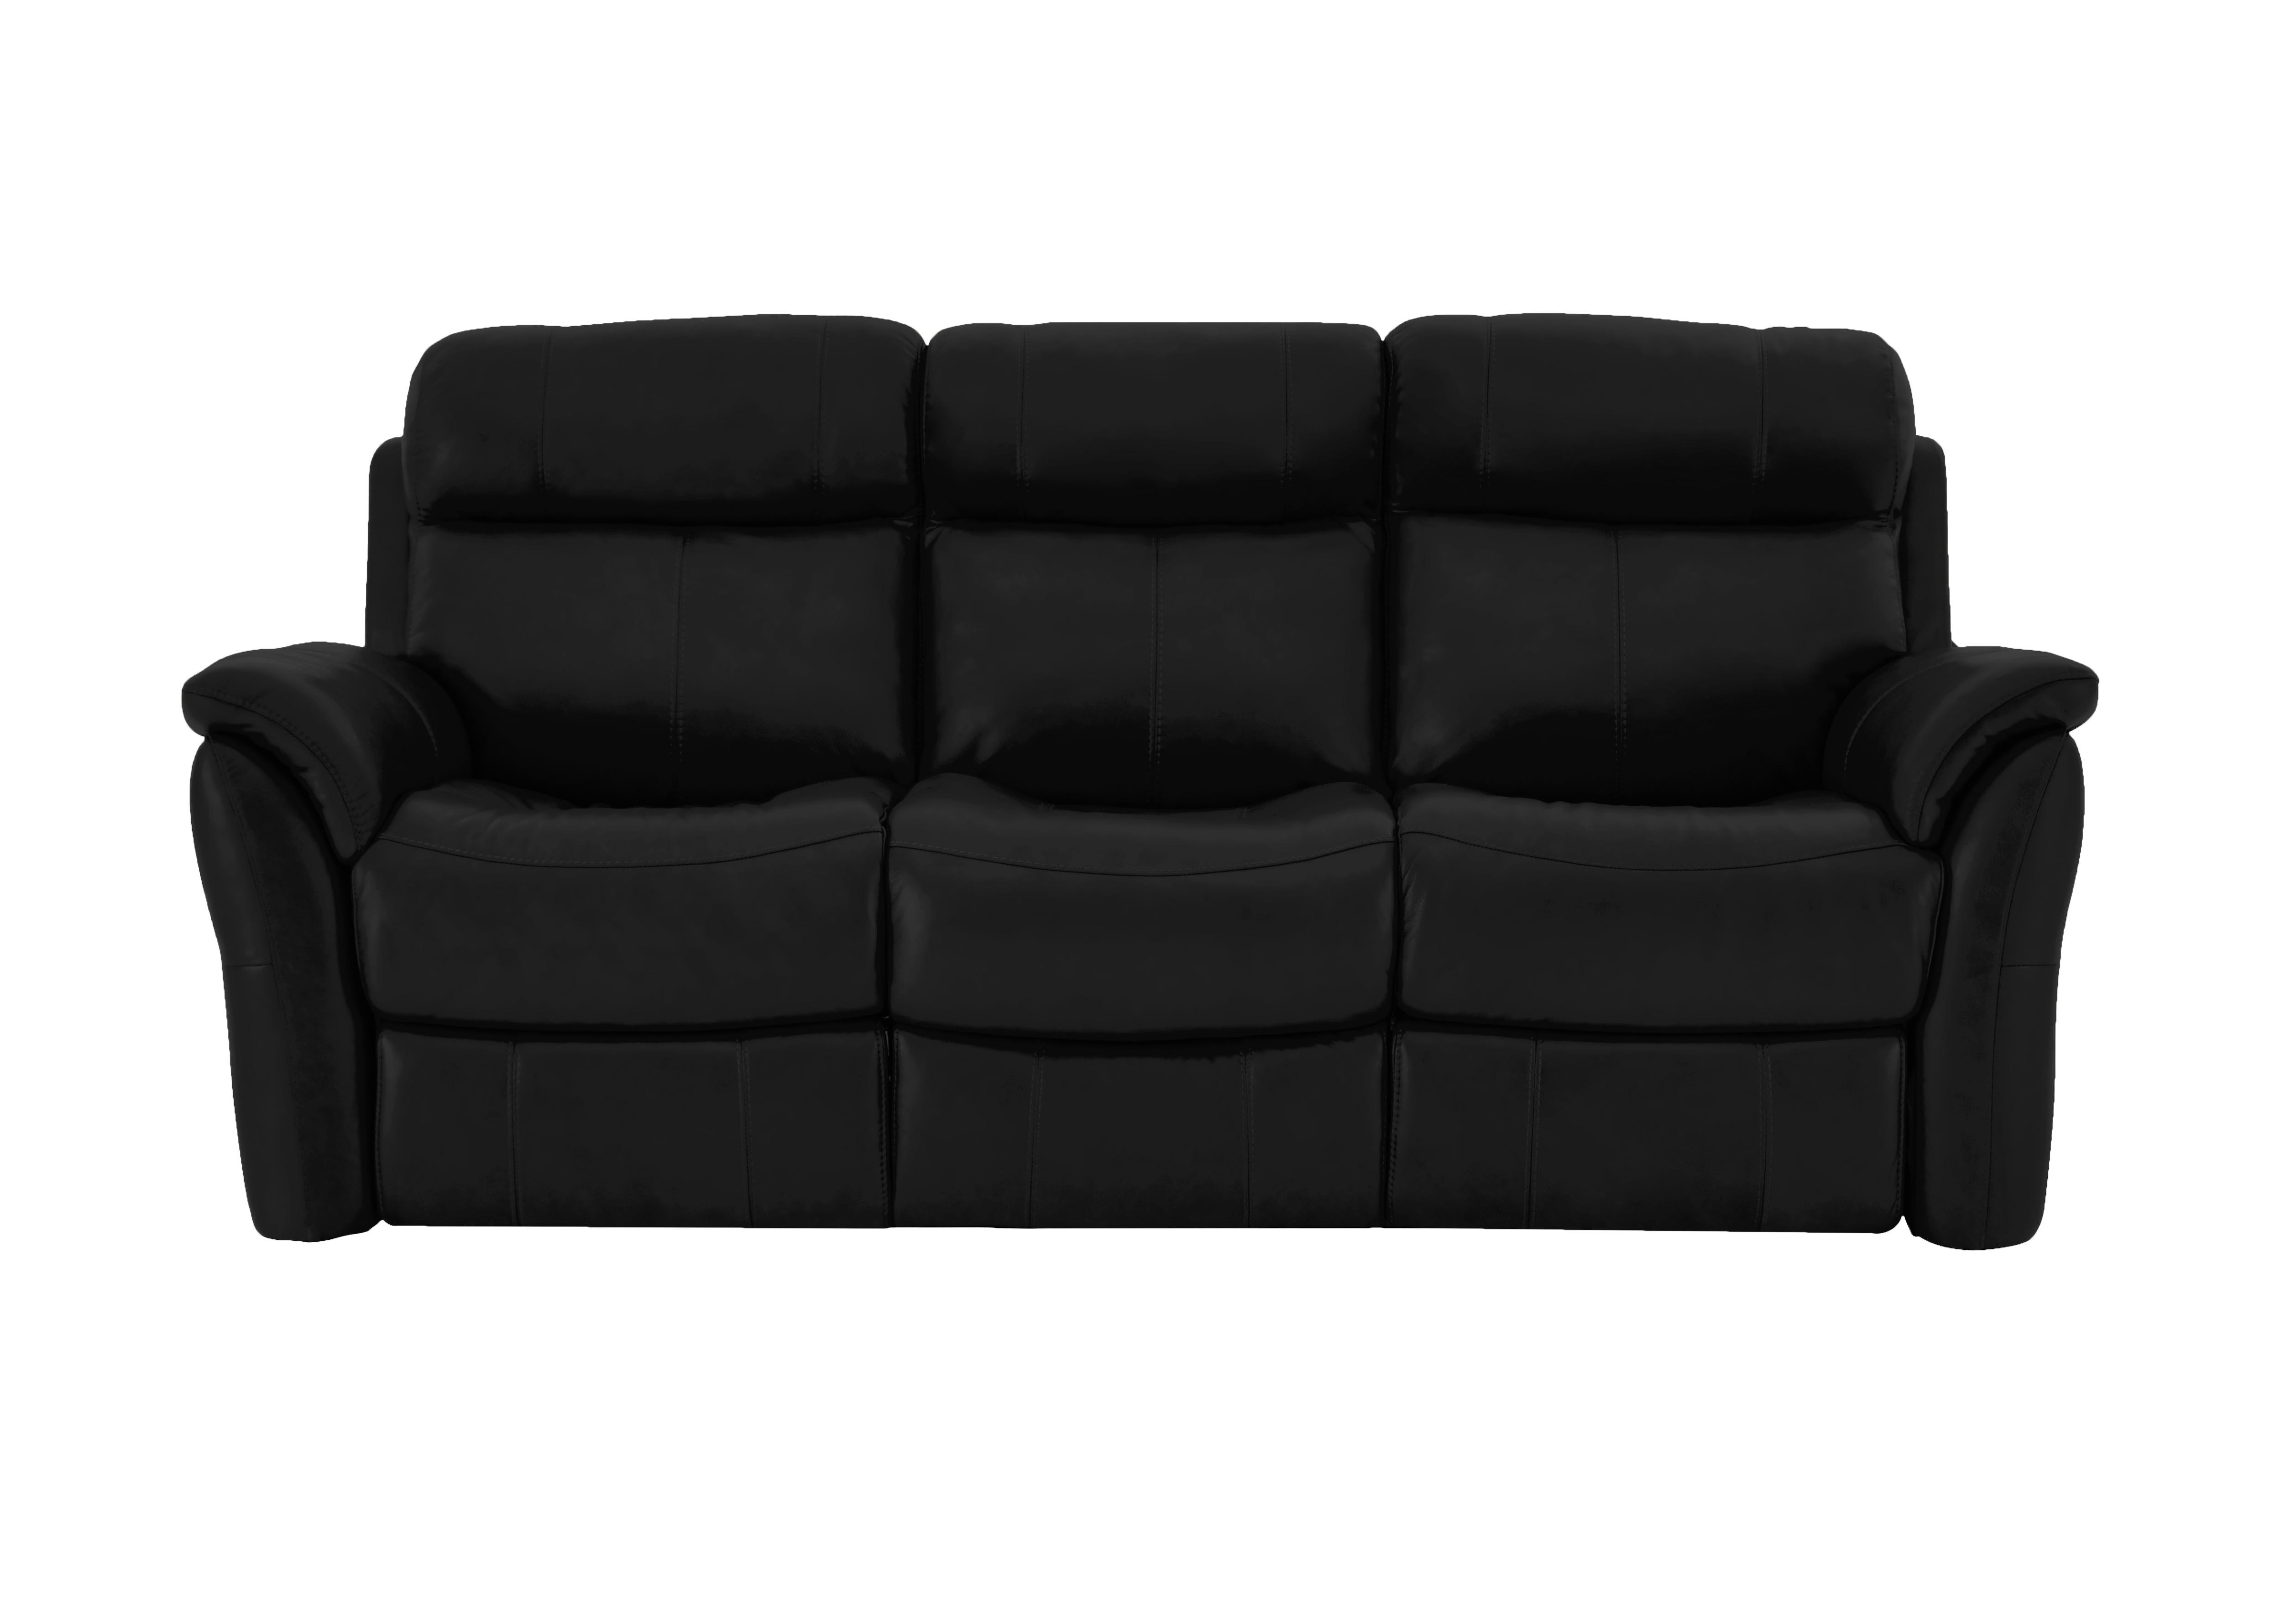 Relax Station Revive 3 Seater Leather Sofa in Bv-3500 Classic Black on Furniture Village